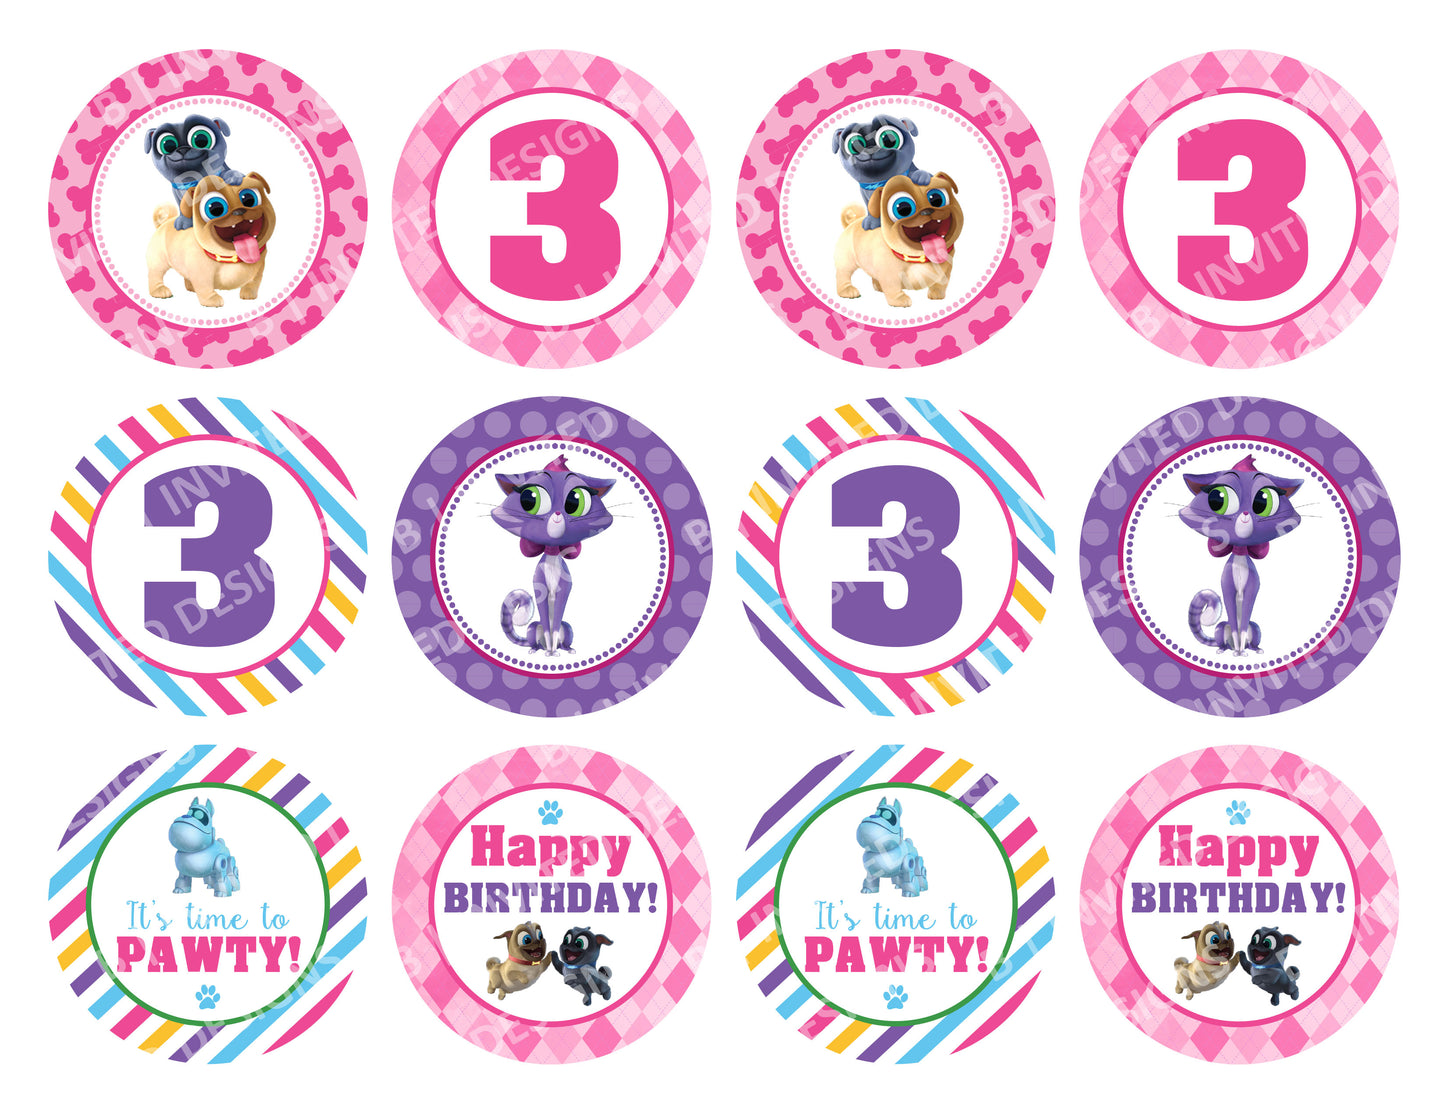 PUPPY DOG PALS Pink Cupcake Toppers! 2 Inch or 2.5 Inch! Digital OR Printed & Fully Assembled!